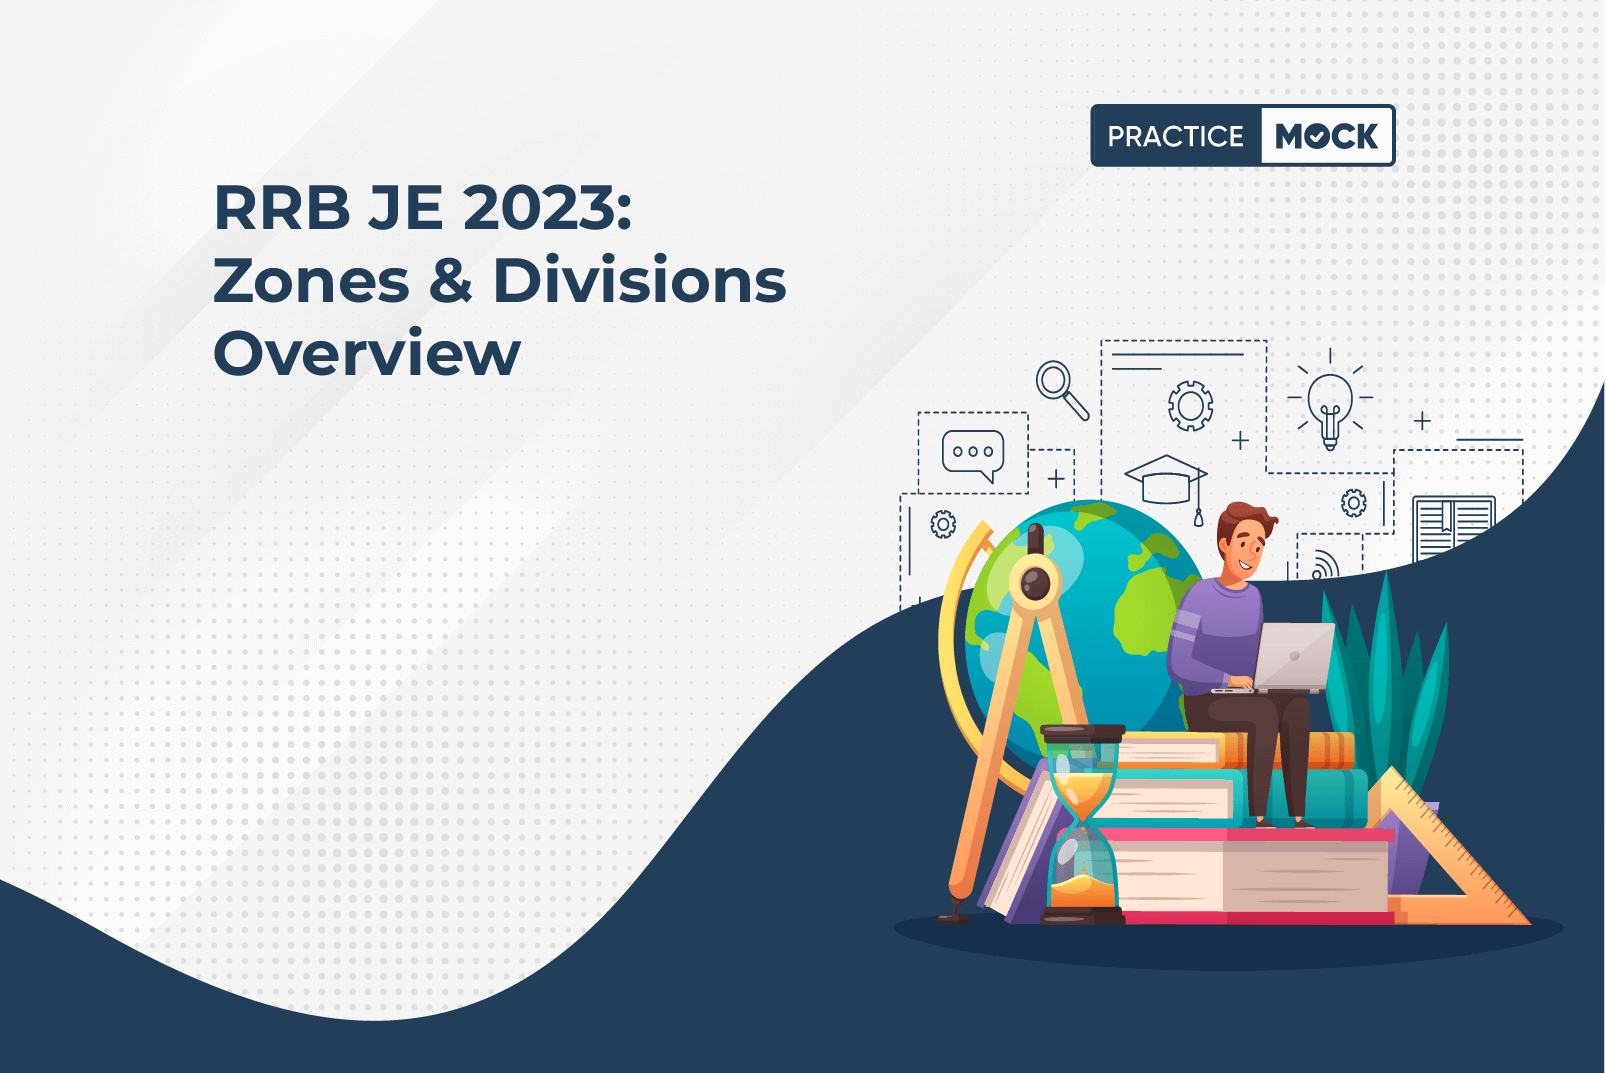 RRB JE 2023: Zones & Divisions Overview